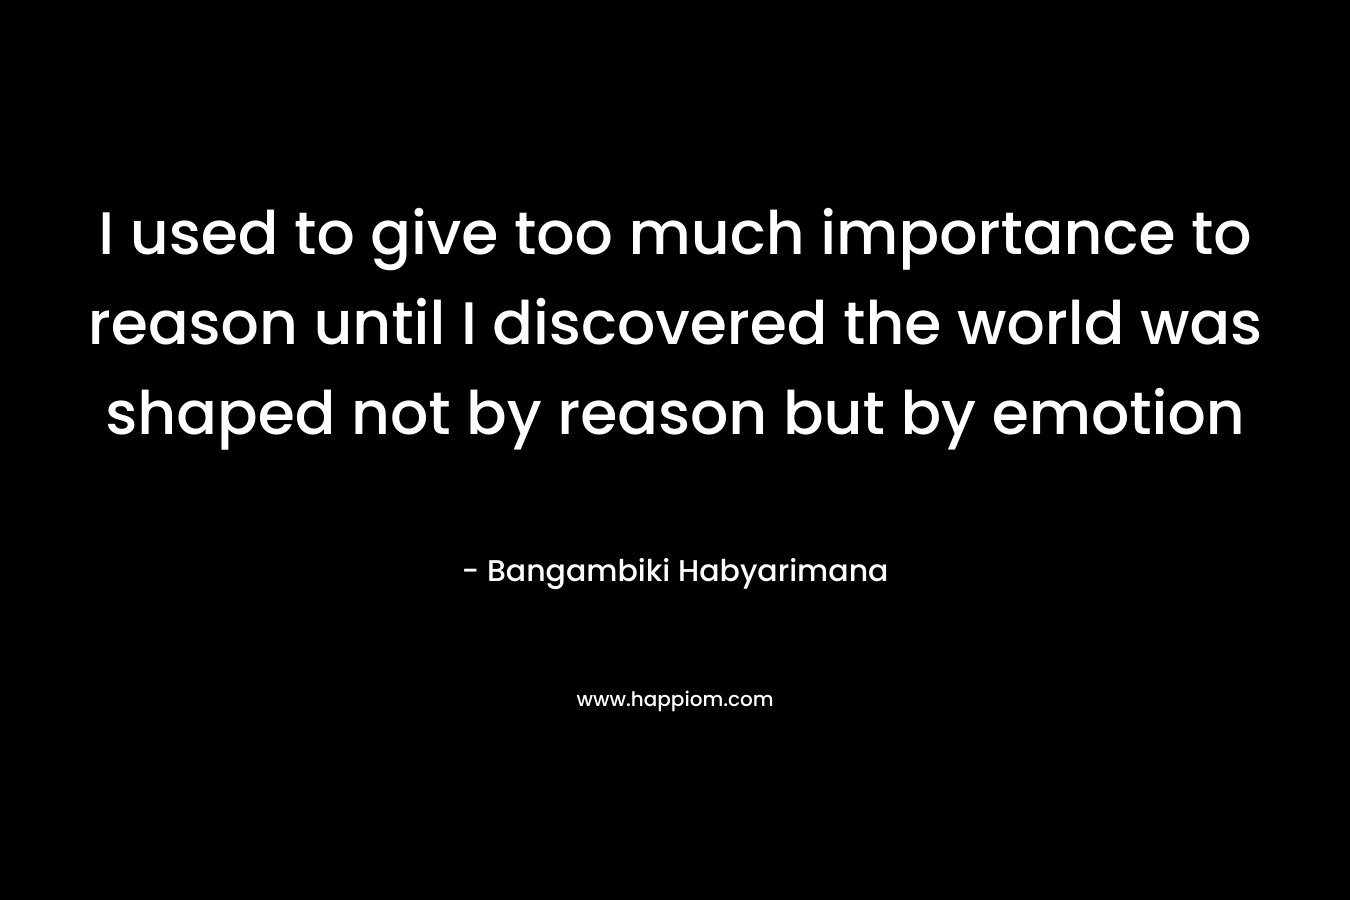 I used to give too much importance to reason until I discovered the world was shaped not by reason but by emotion